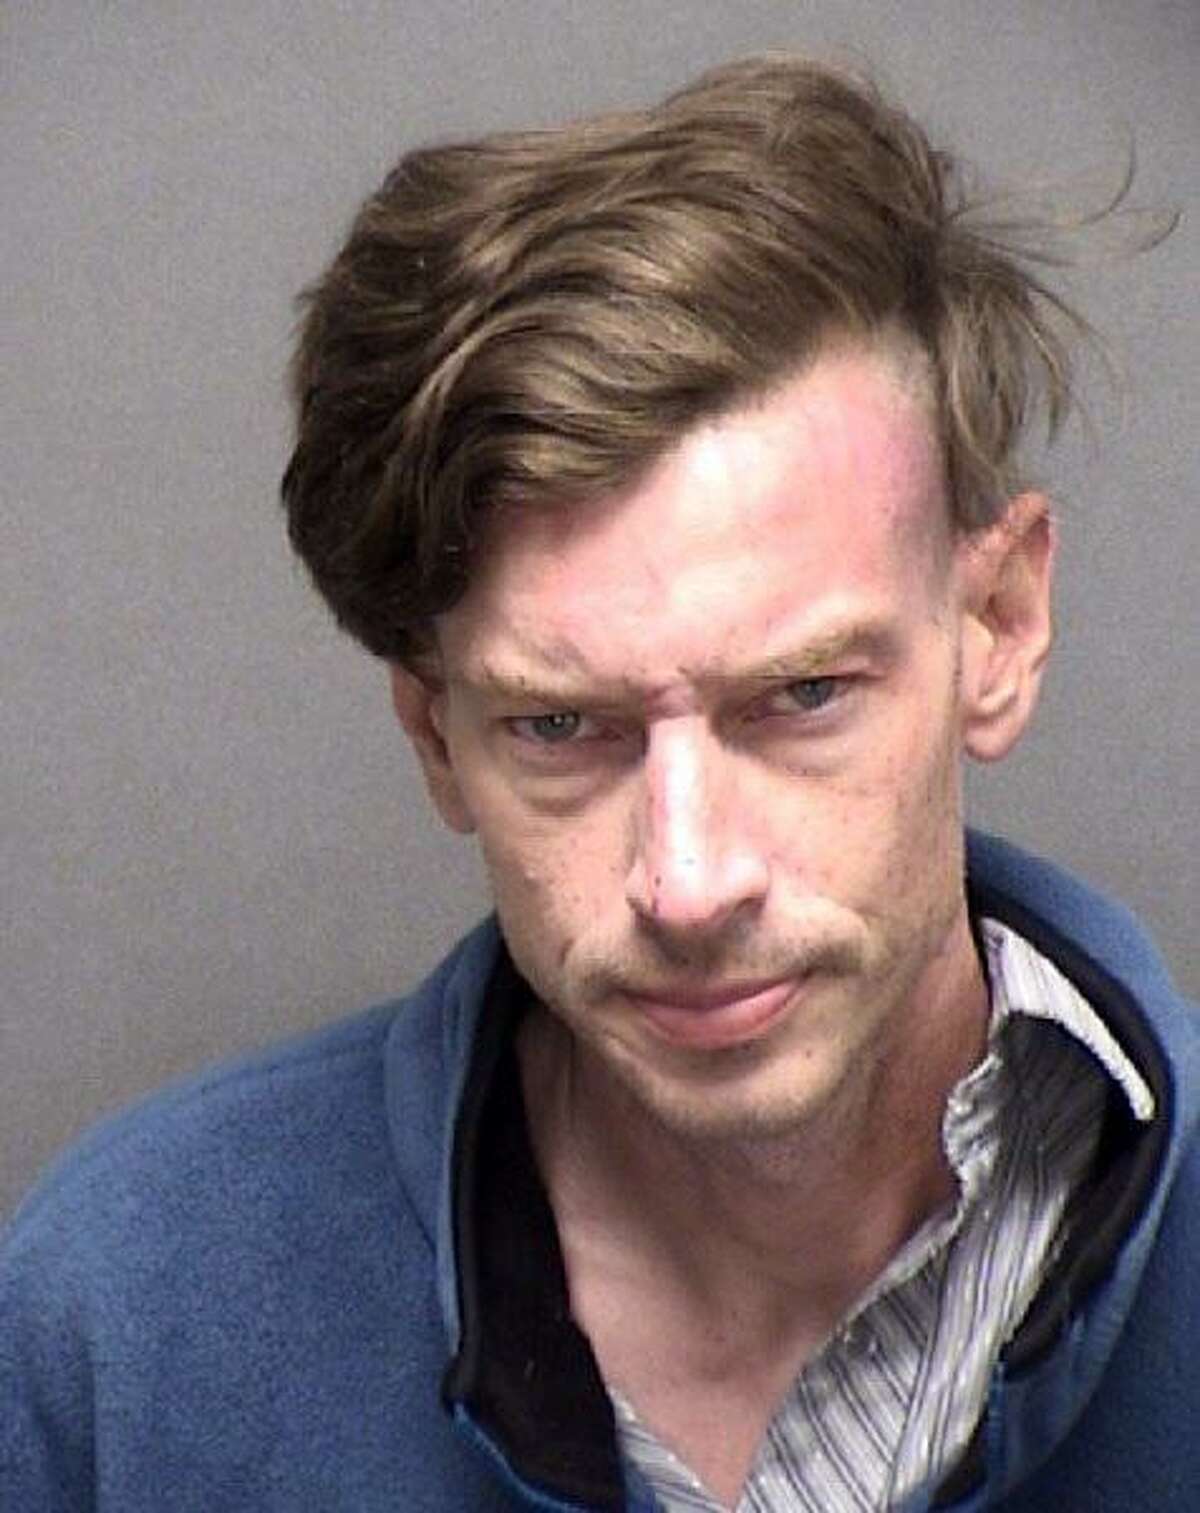 Christopher Thomas Norton was sentenced Wednesday to 18 years in prison for fleeing the scene of a crash that killed motorcyclist Phillip Warren Snow III on Nov. 9, 2020.